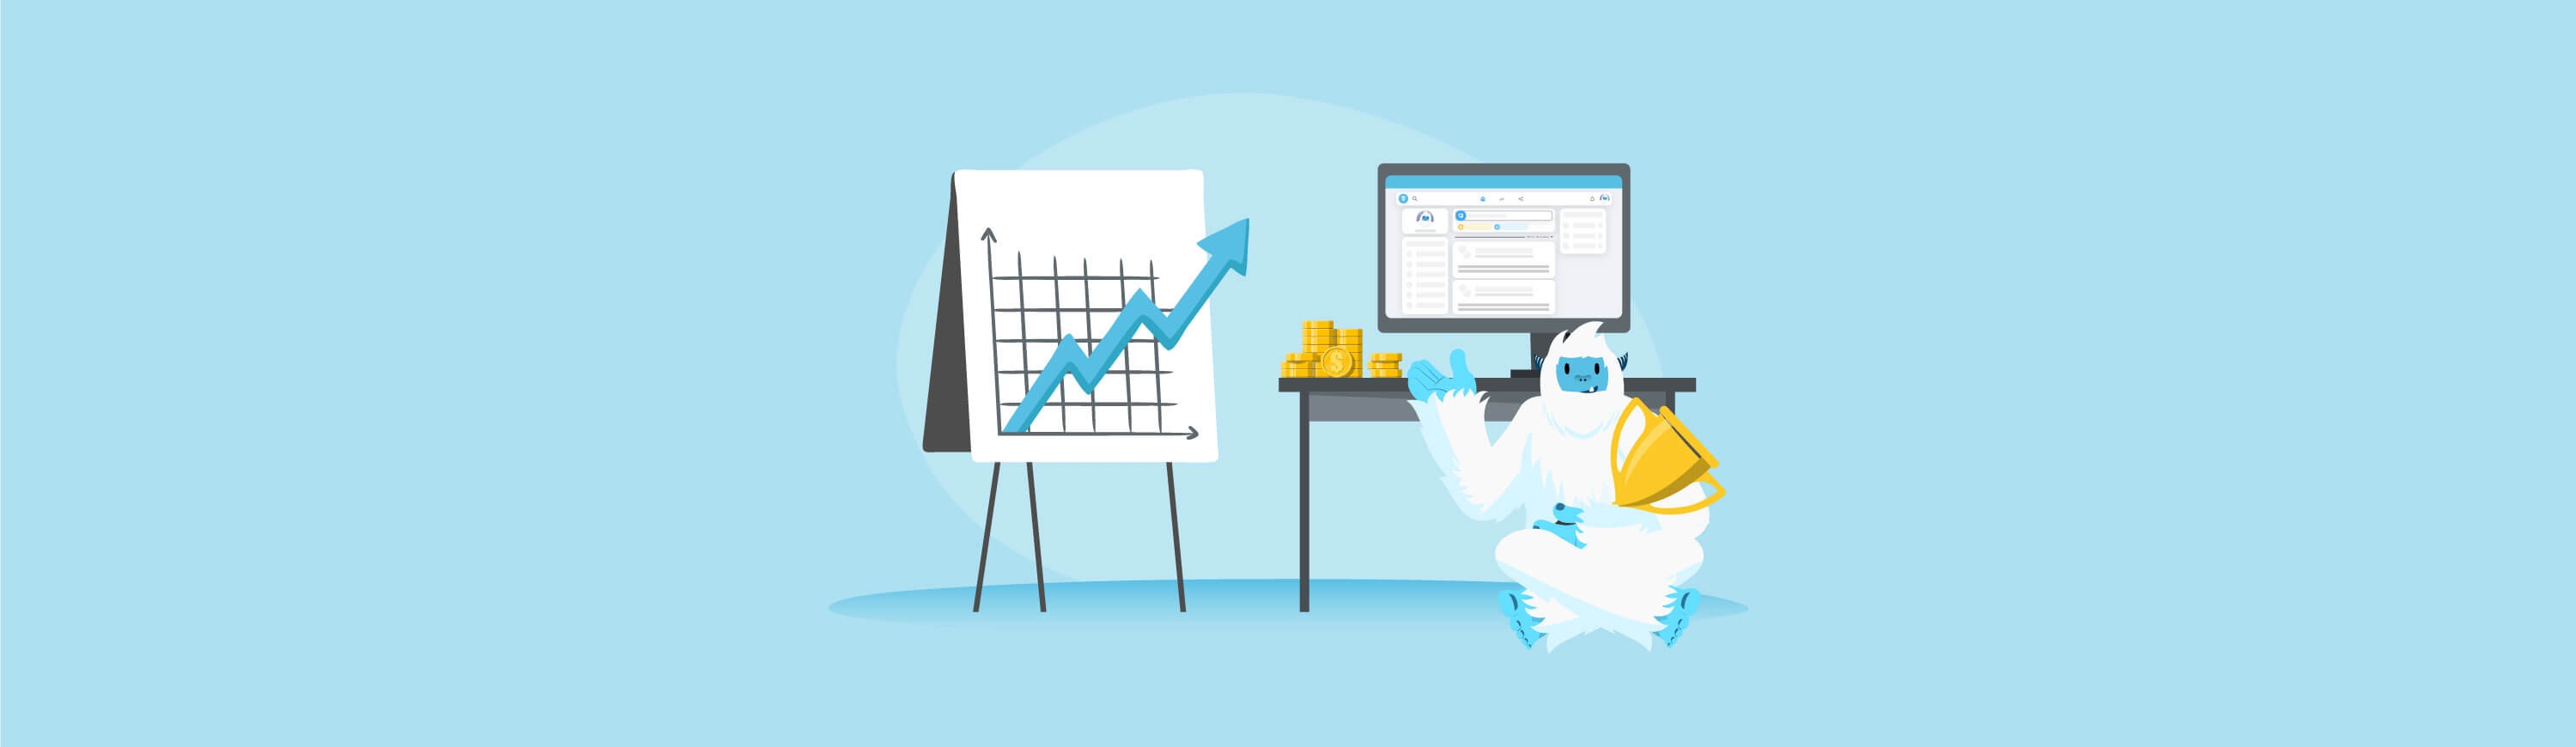 Illustration of Carl the yeti holding a trophy sitting next to a graph trending upwards.